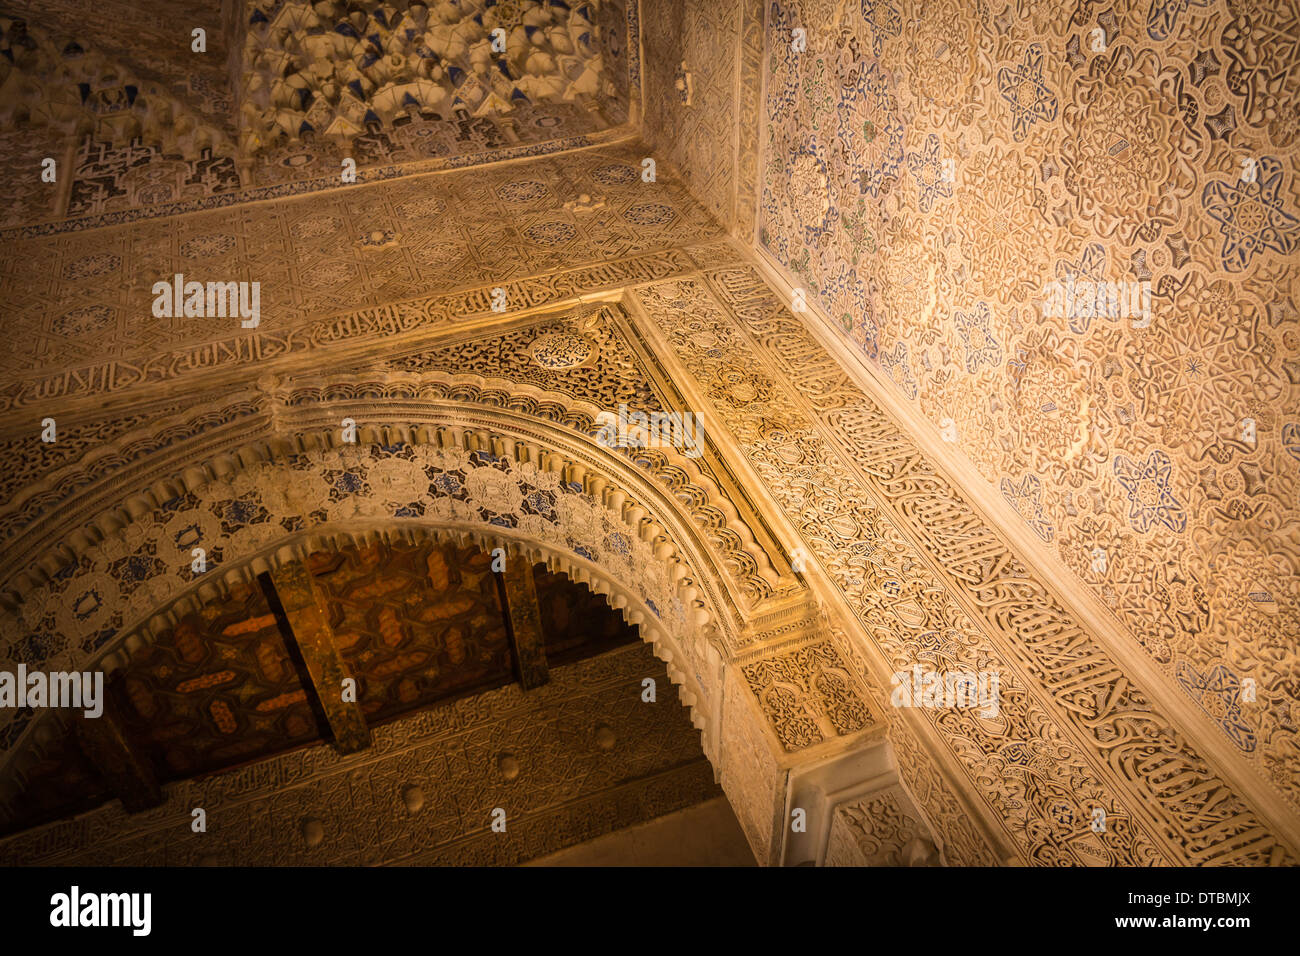 One of the many ornate structures at the beautiful palace and gardens at Alhambra in Granada, Andalusia, southern Spain. Stock Photo